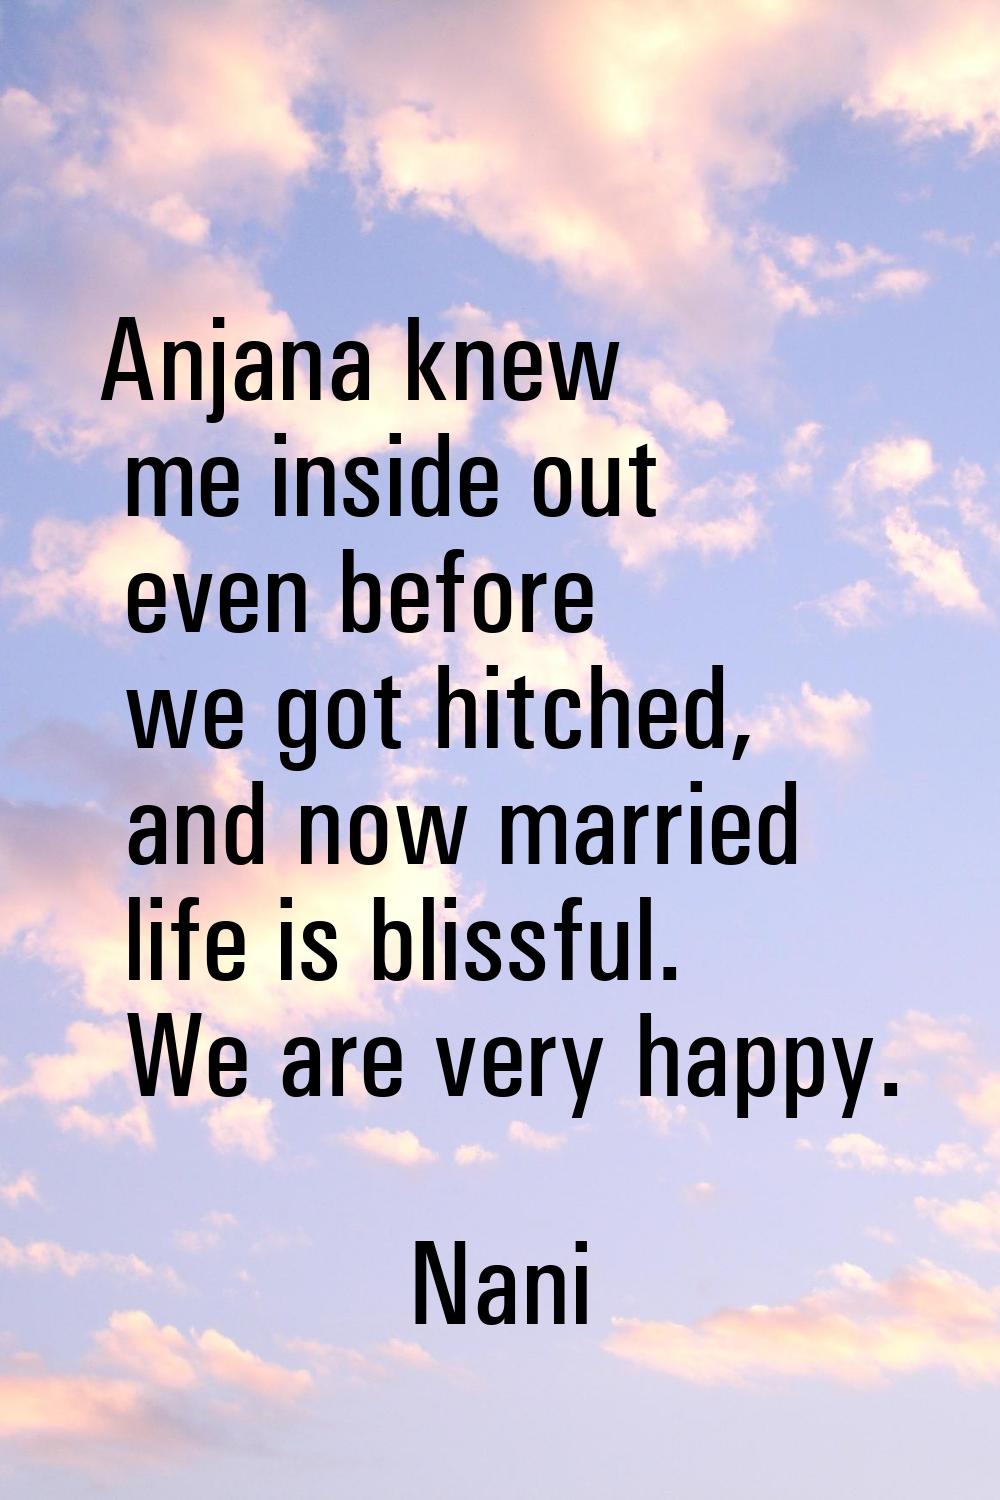 Anjana knew me inside out even before we got hitched, and now married life is blissful. We are very